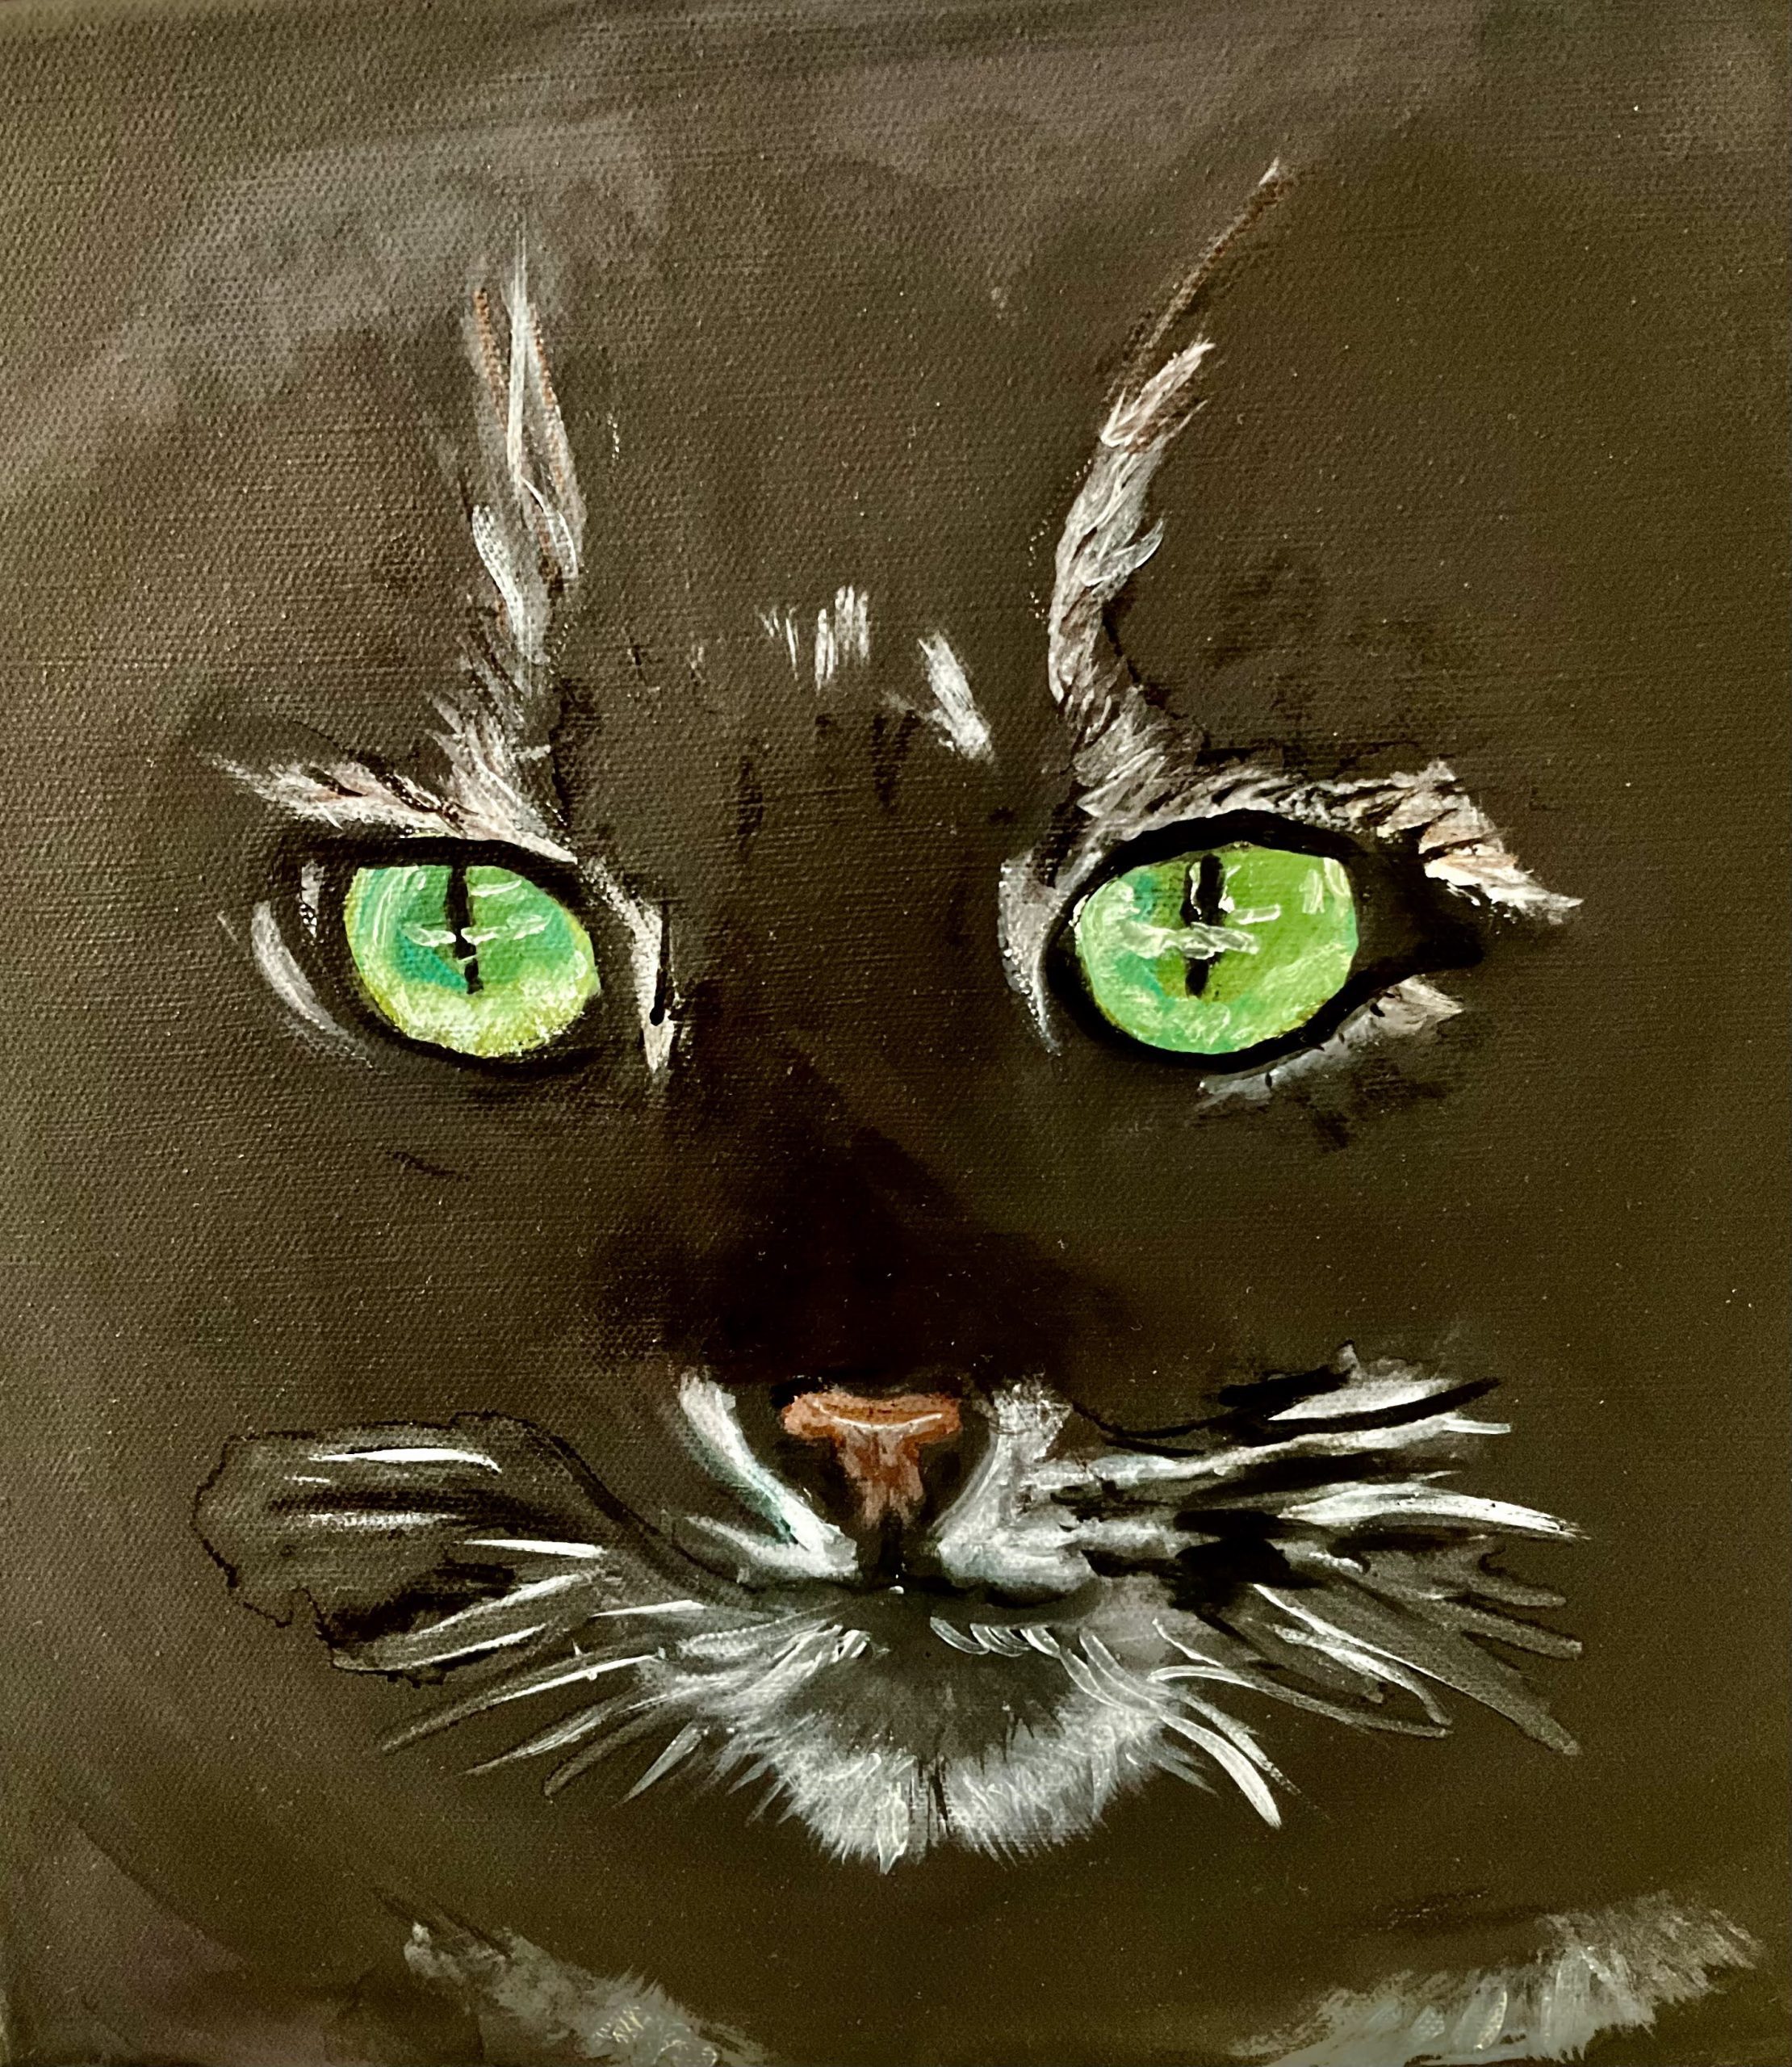 Black cat painting with white whiskers and hairs